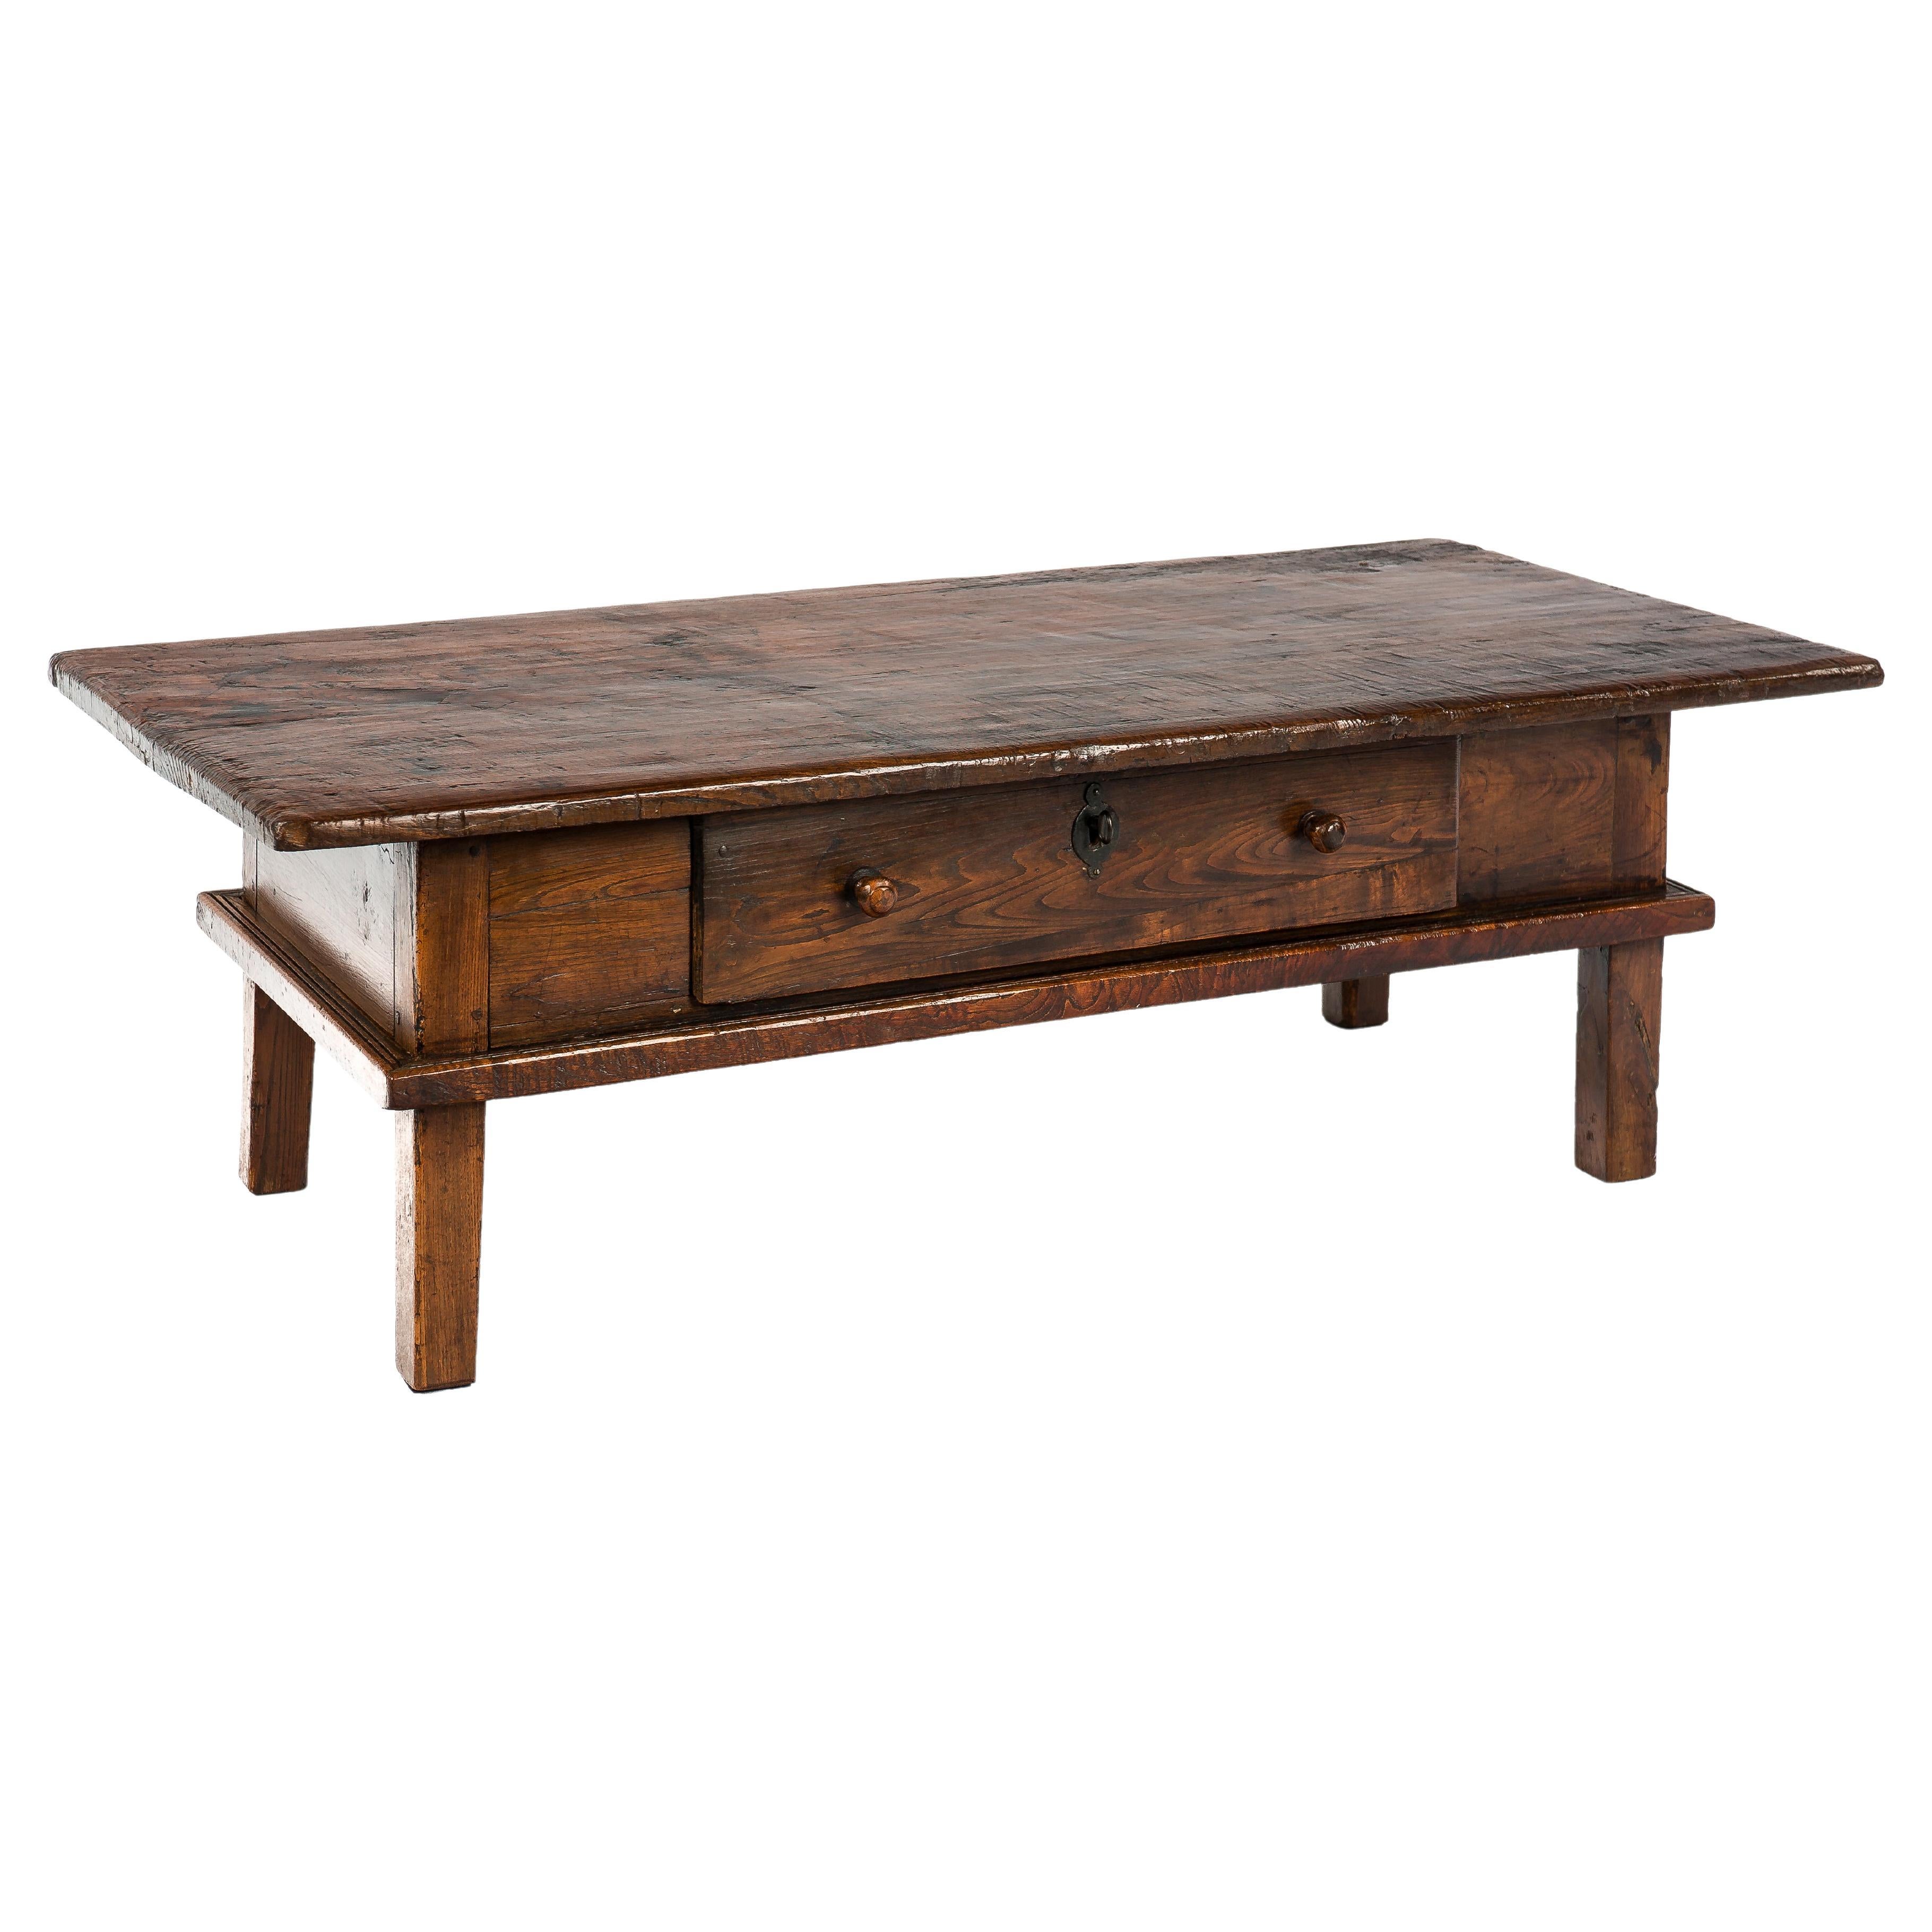 Antique Early 19th-Century Rustic Spanish Warm Brown Chestnut Coffee Table